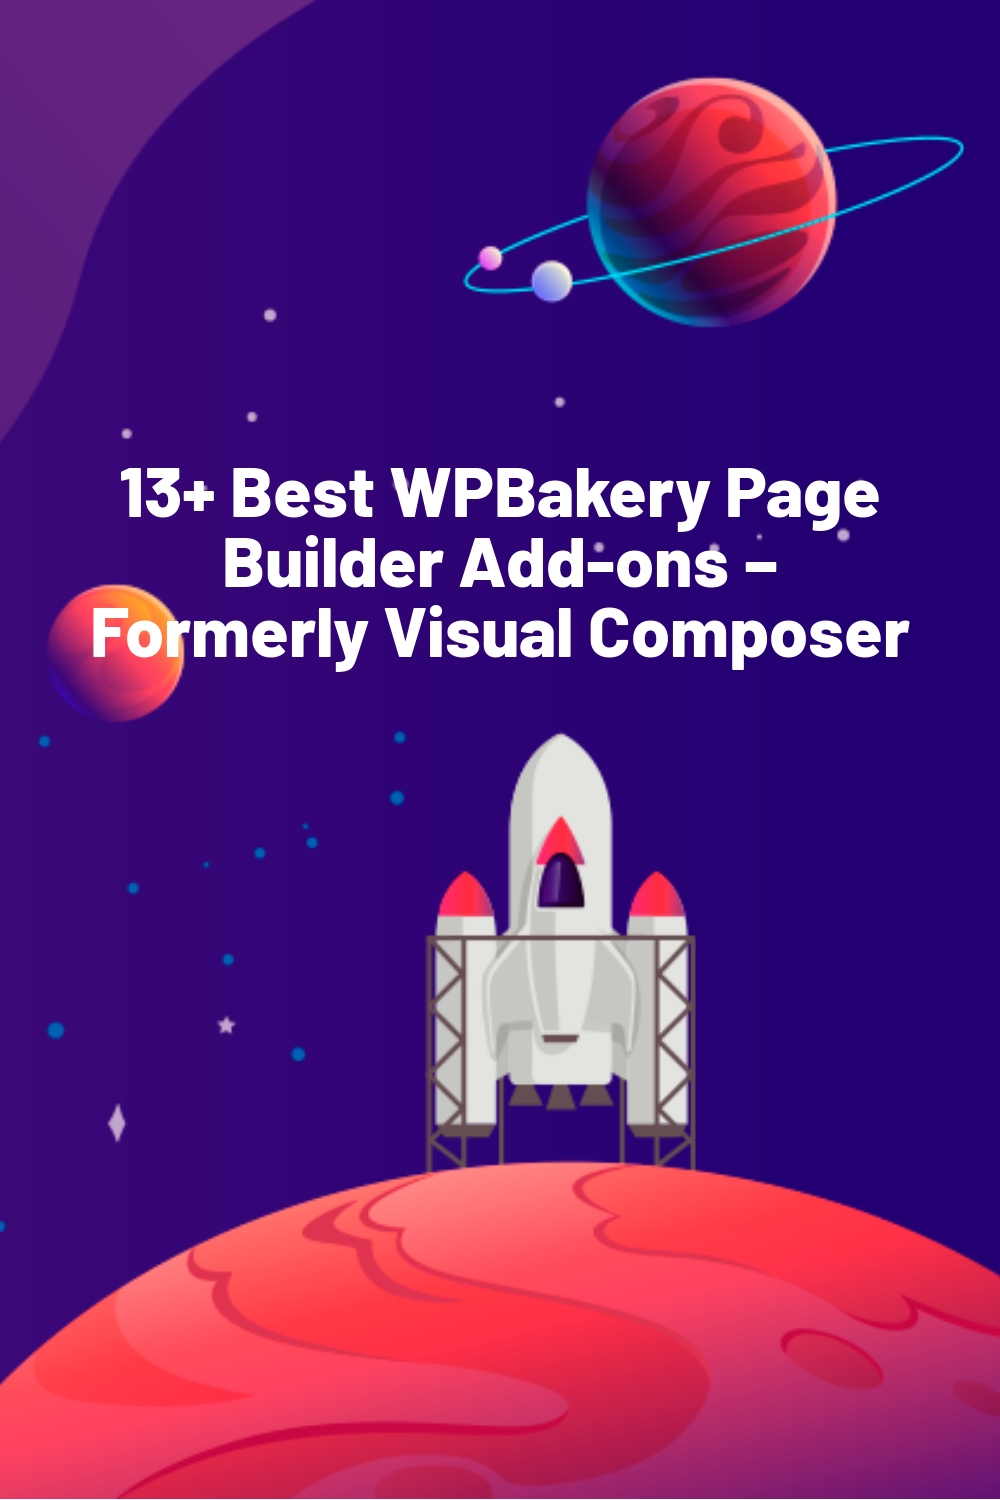 13+ Best WPBakery Page Builder Add-ons – Formerly Visual Composer